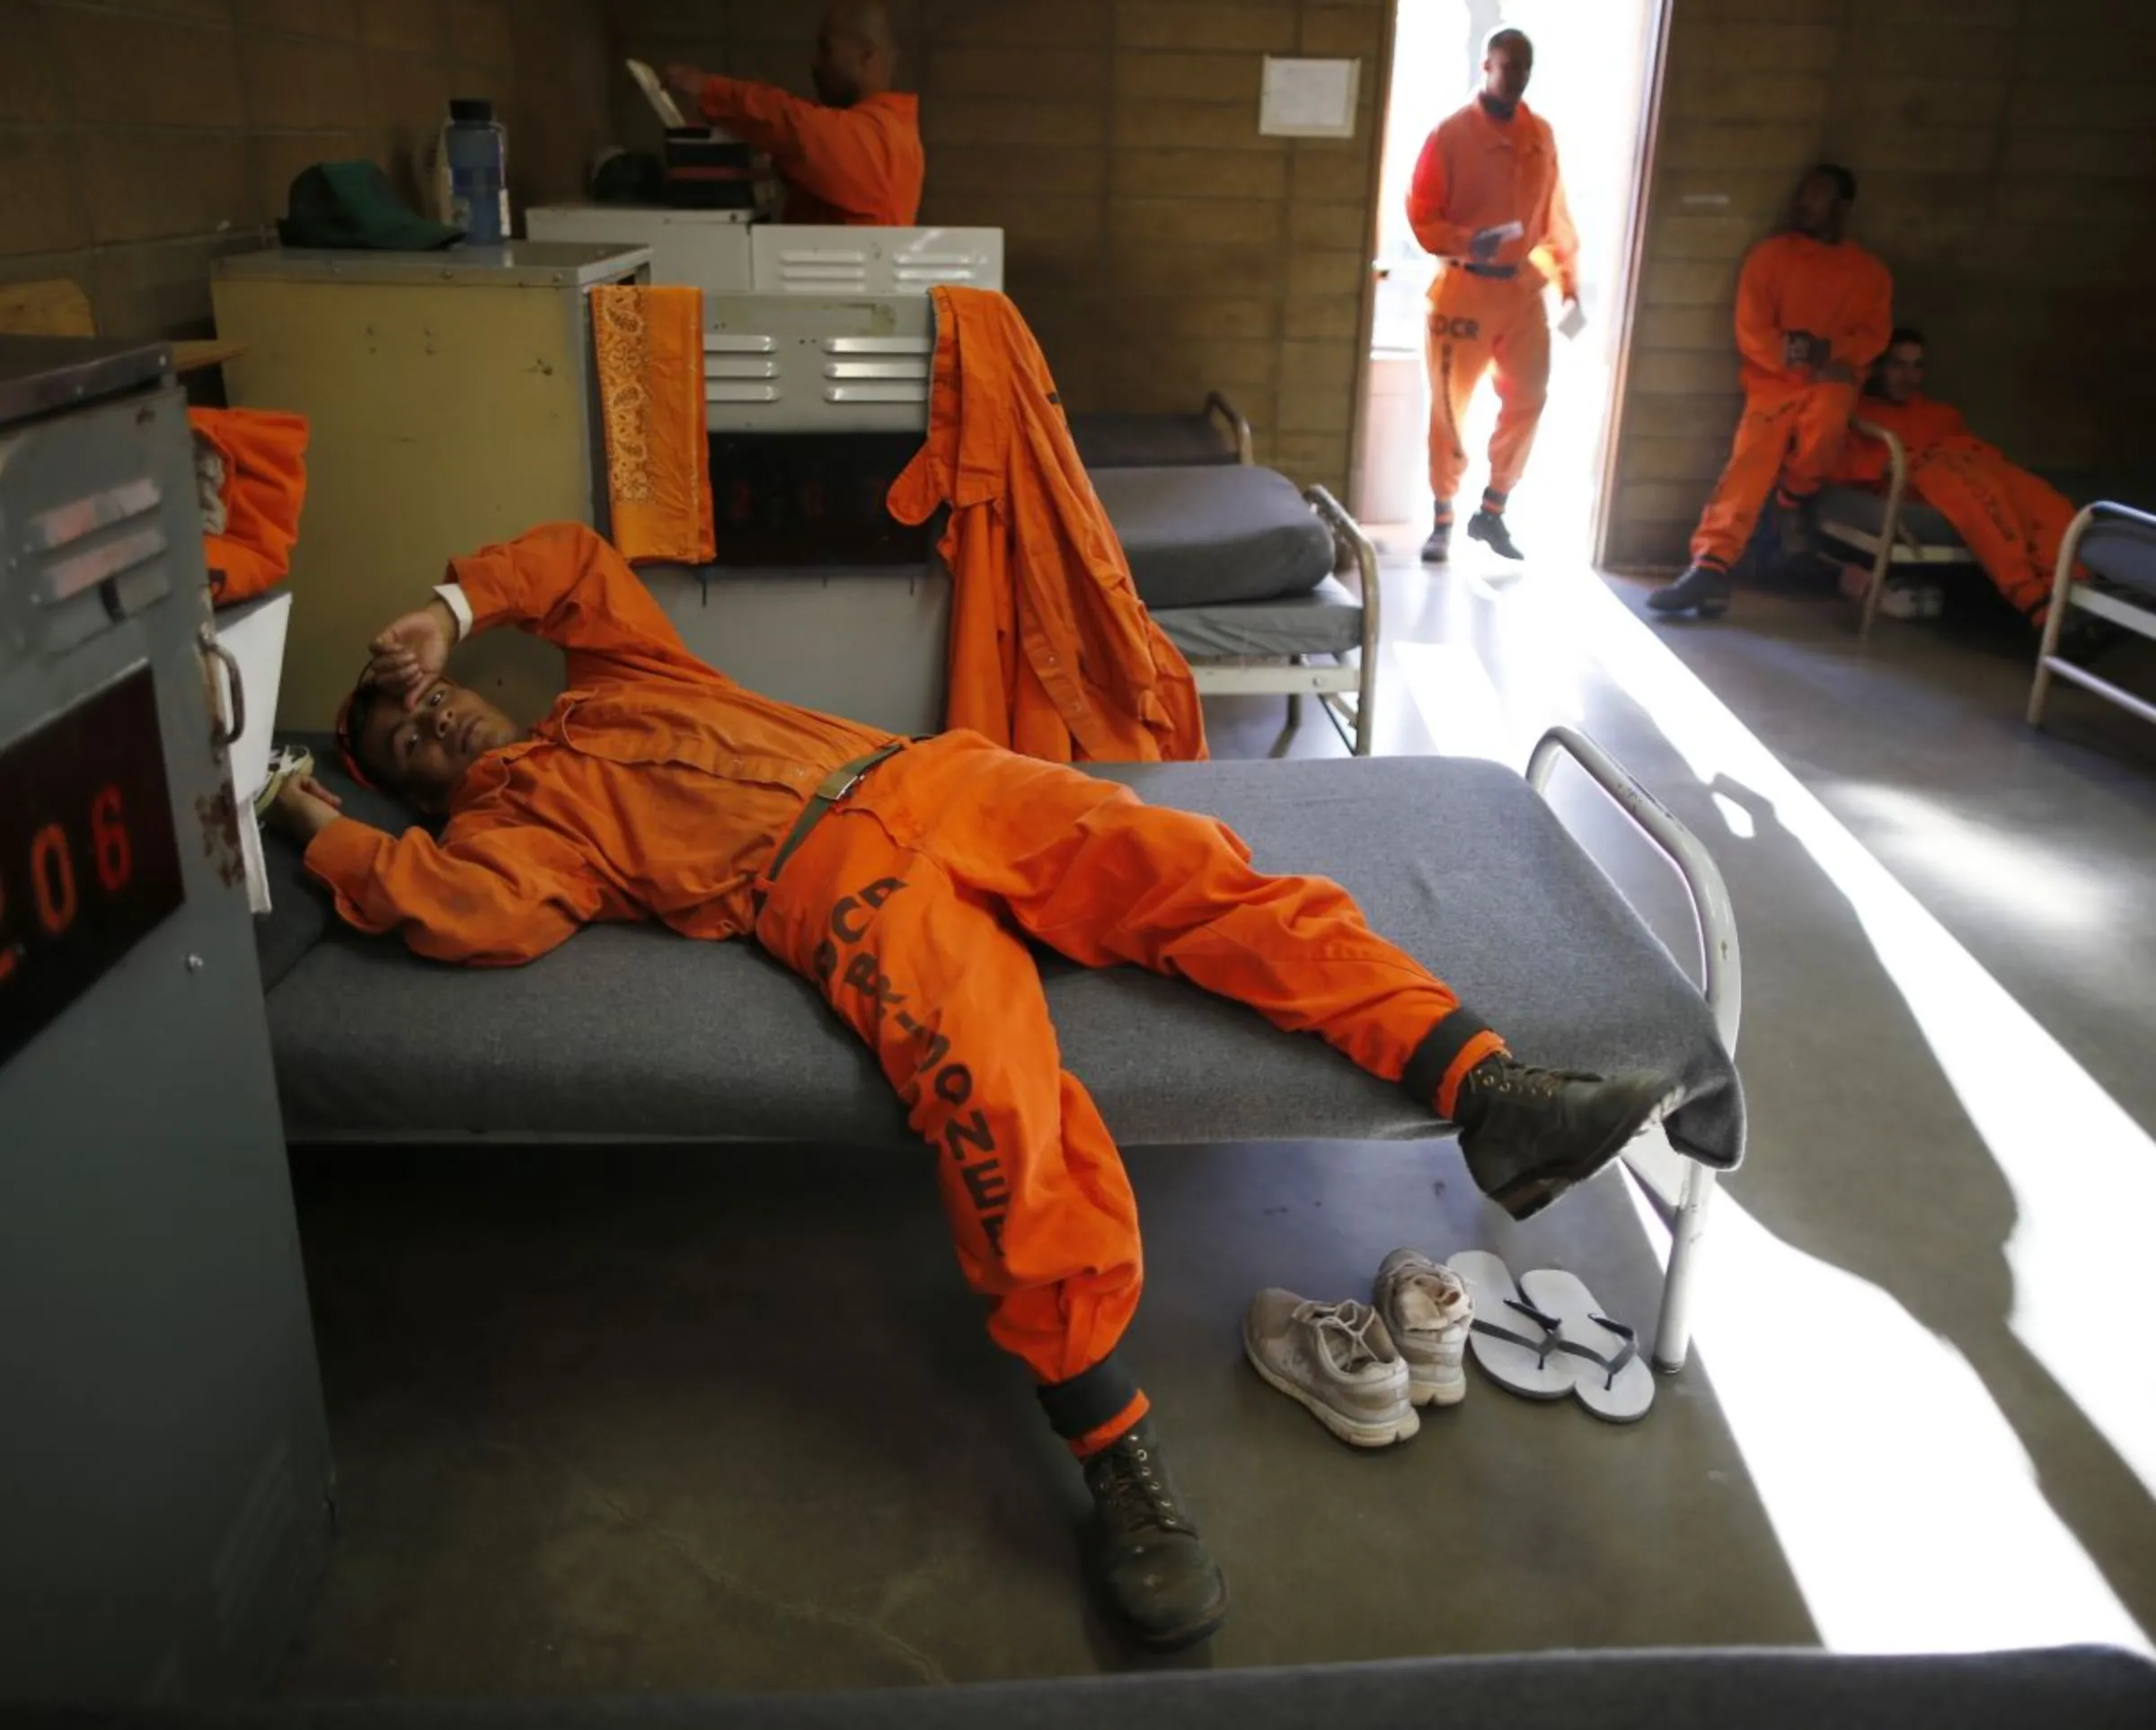 Prison inmate lies on his bed at Oak Glen Conservation Fire Camp #35 in Yucaipa, California November 6, 2014. REUTERS/Lucy Nicholson